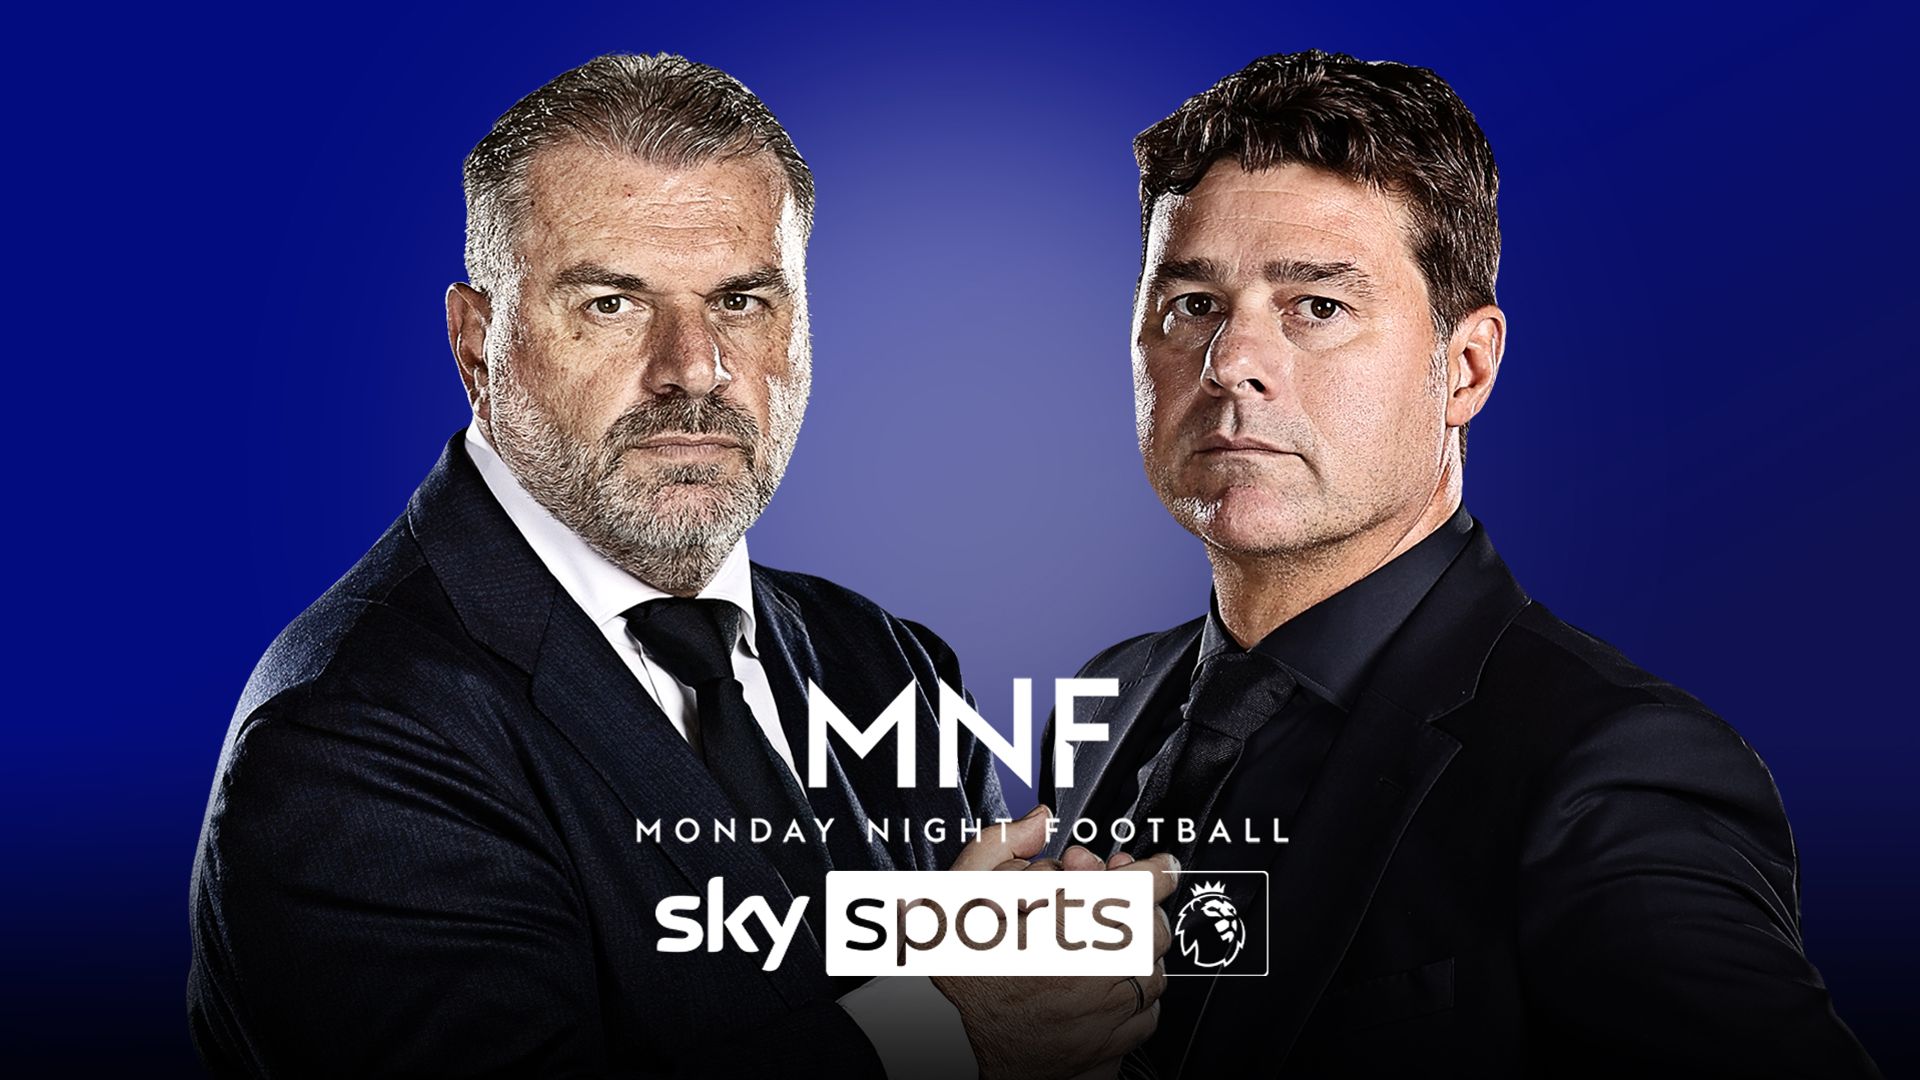 The 111-minute match! MNF drama in numbers